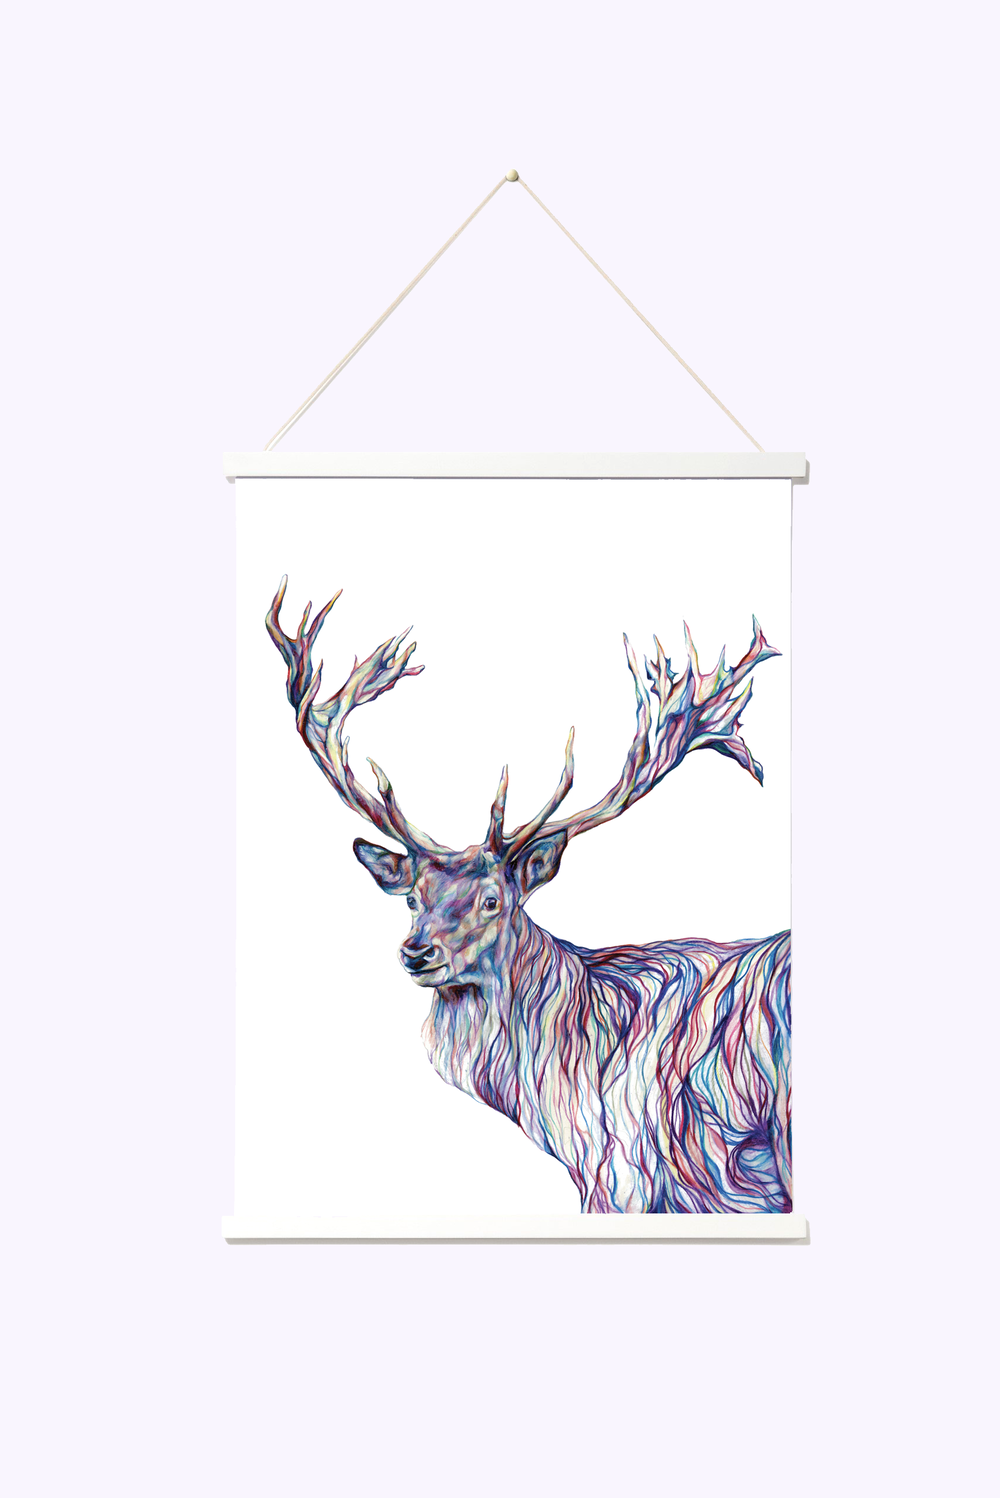 (A3 Print) Stag